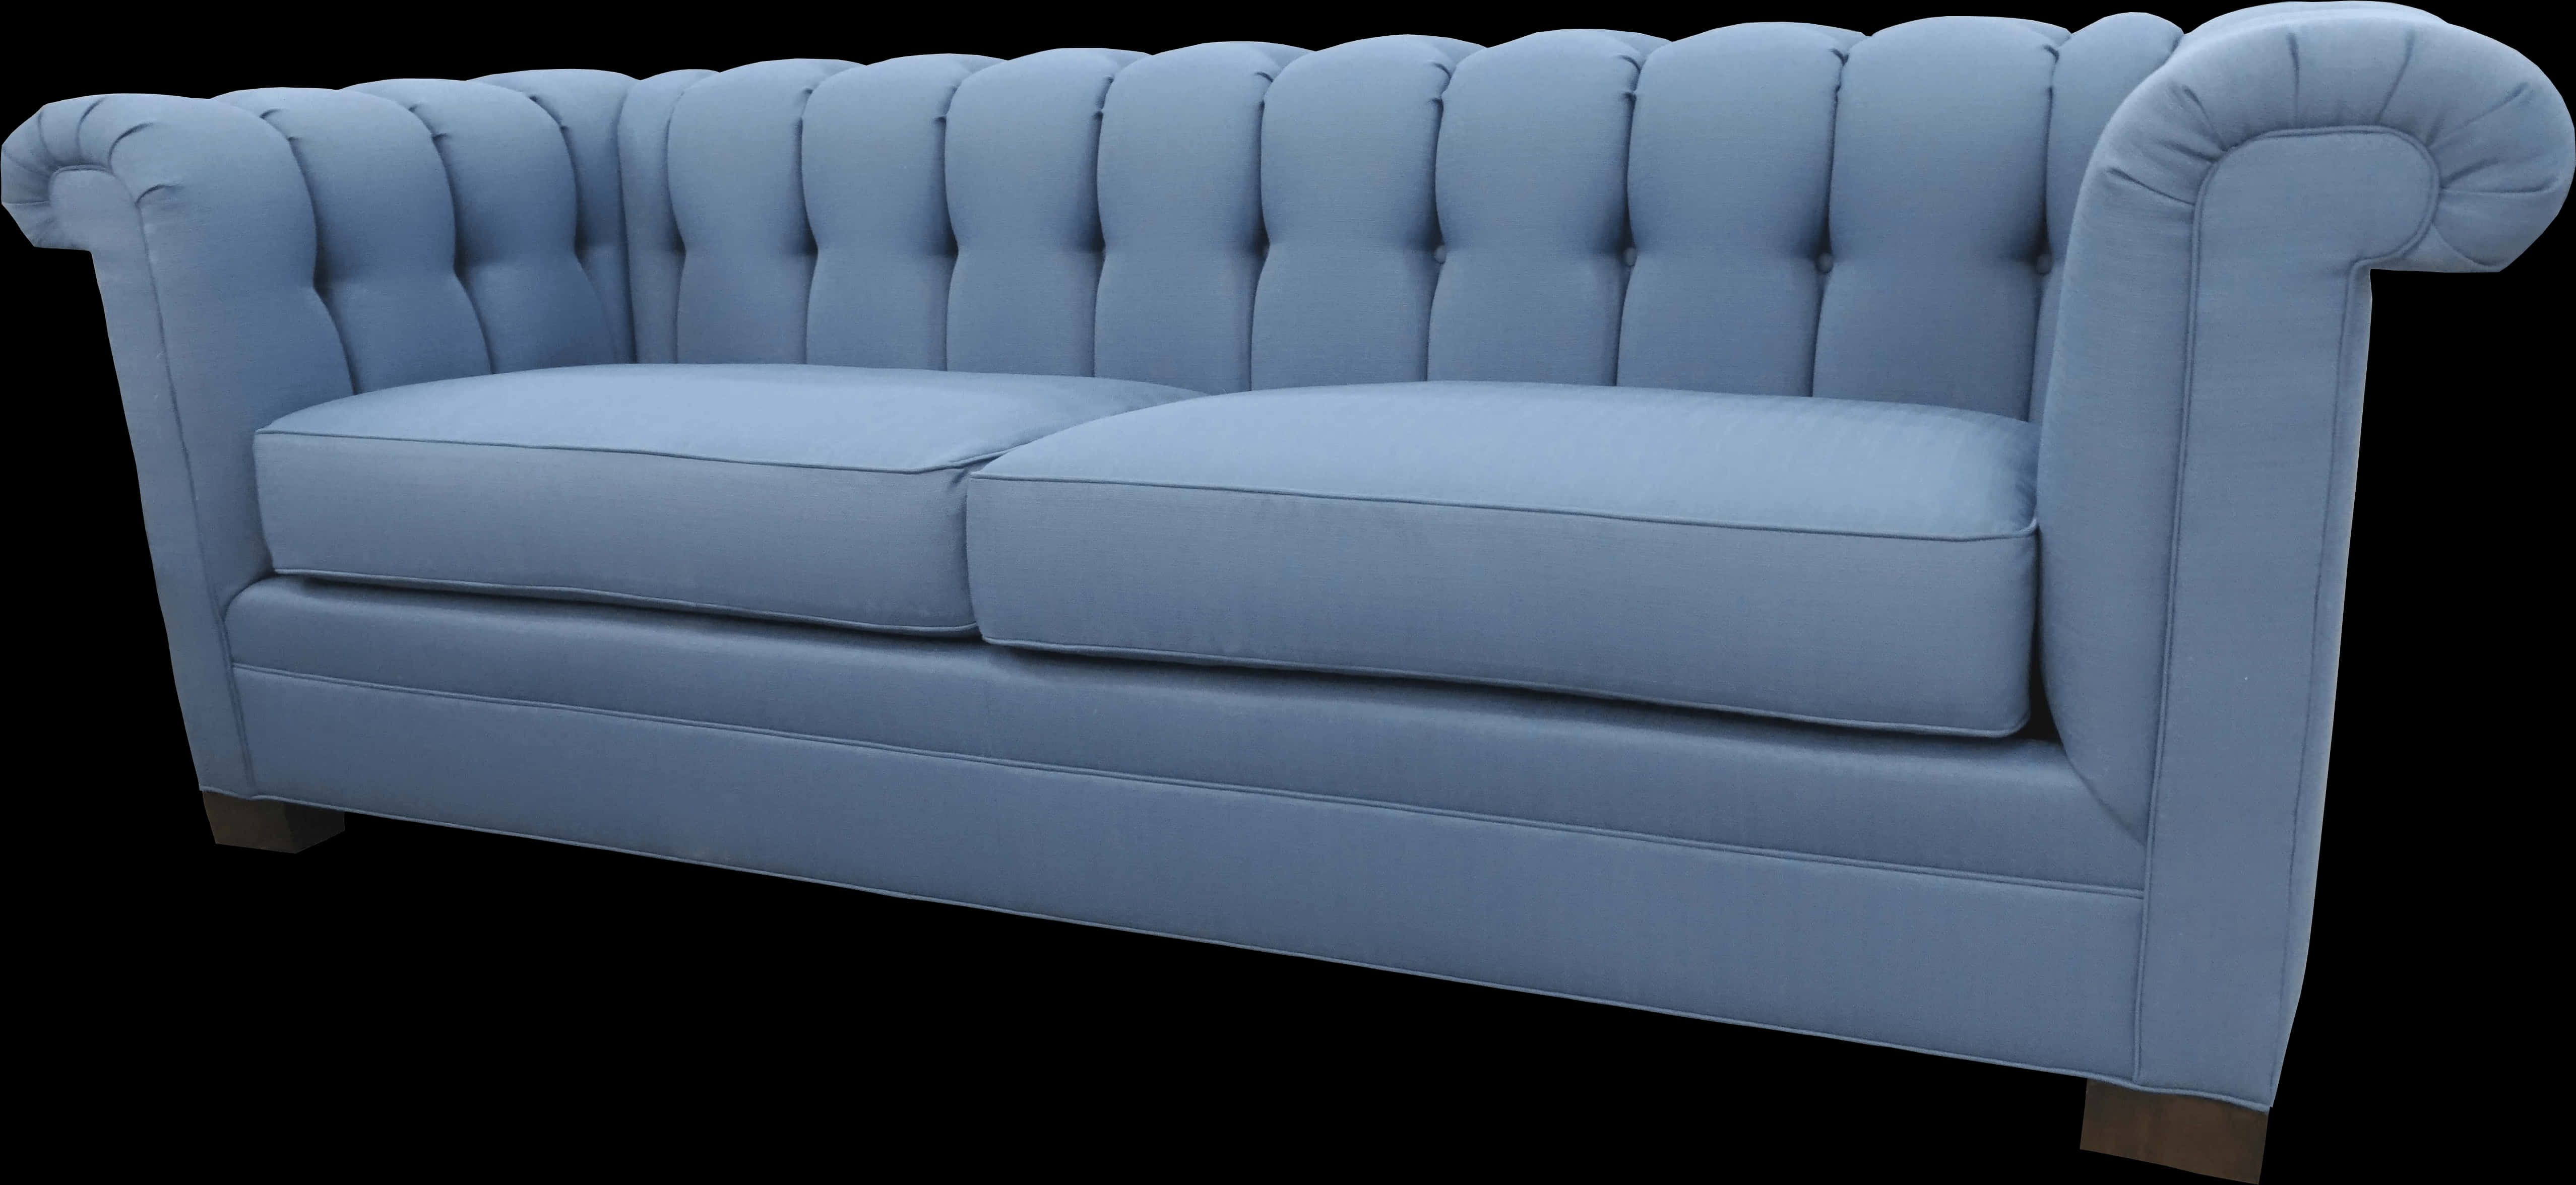 Blue Tufted Chesterfield Sofa PNG